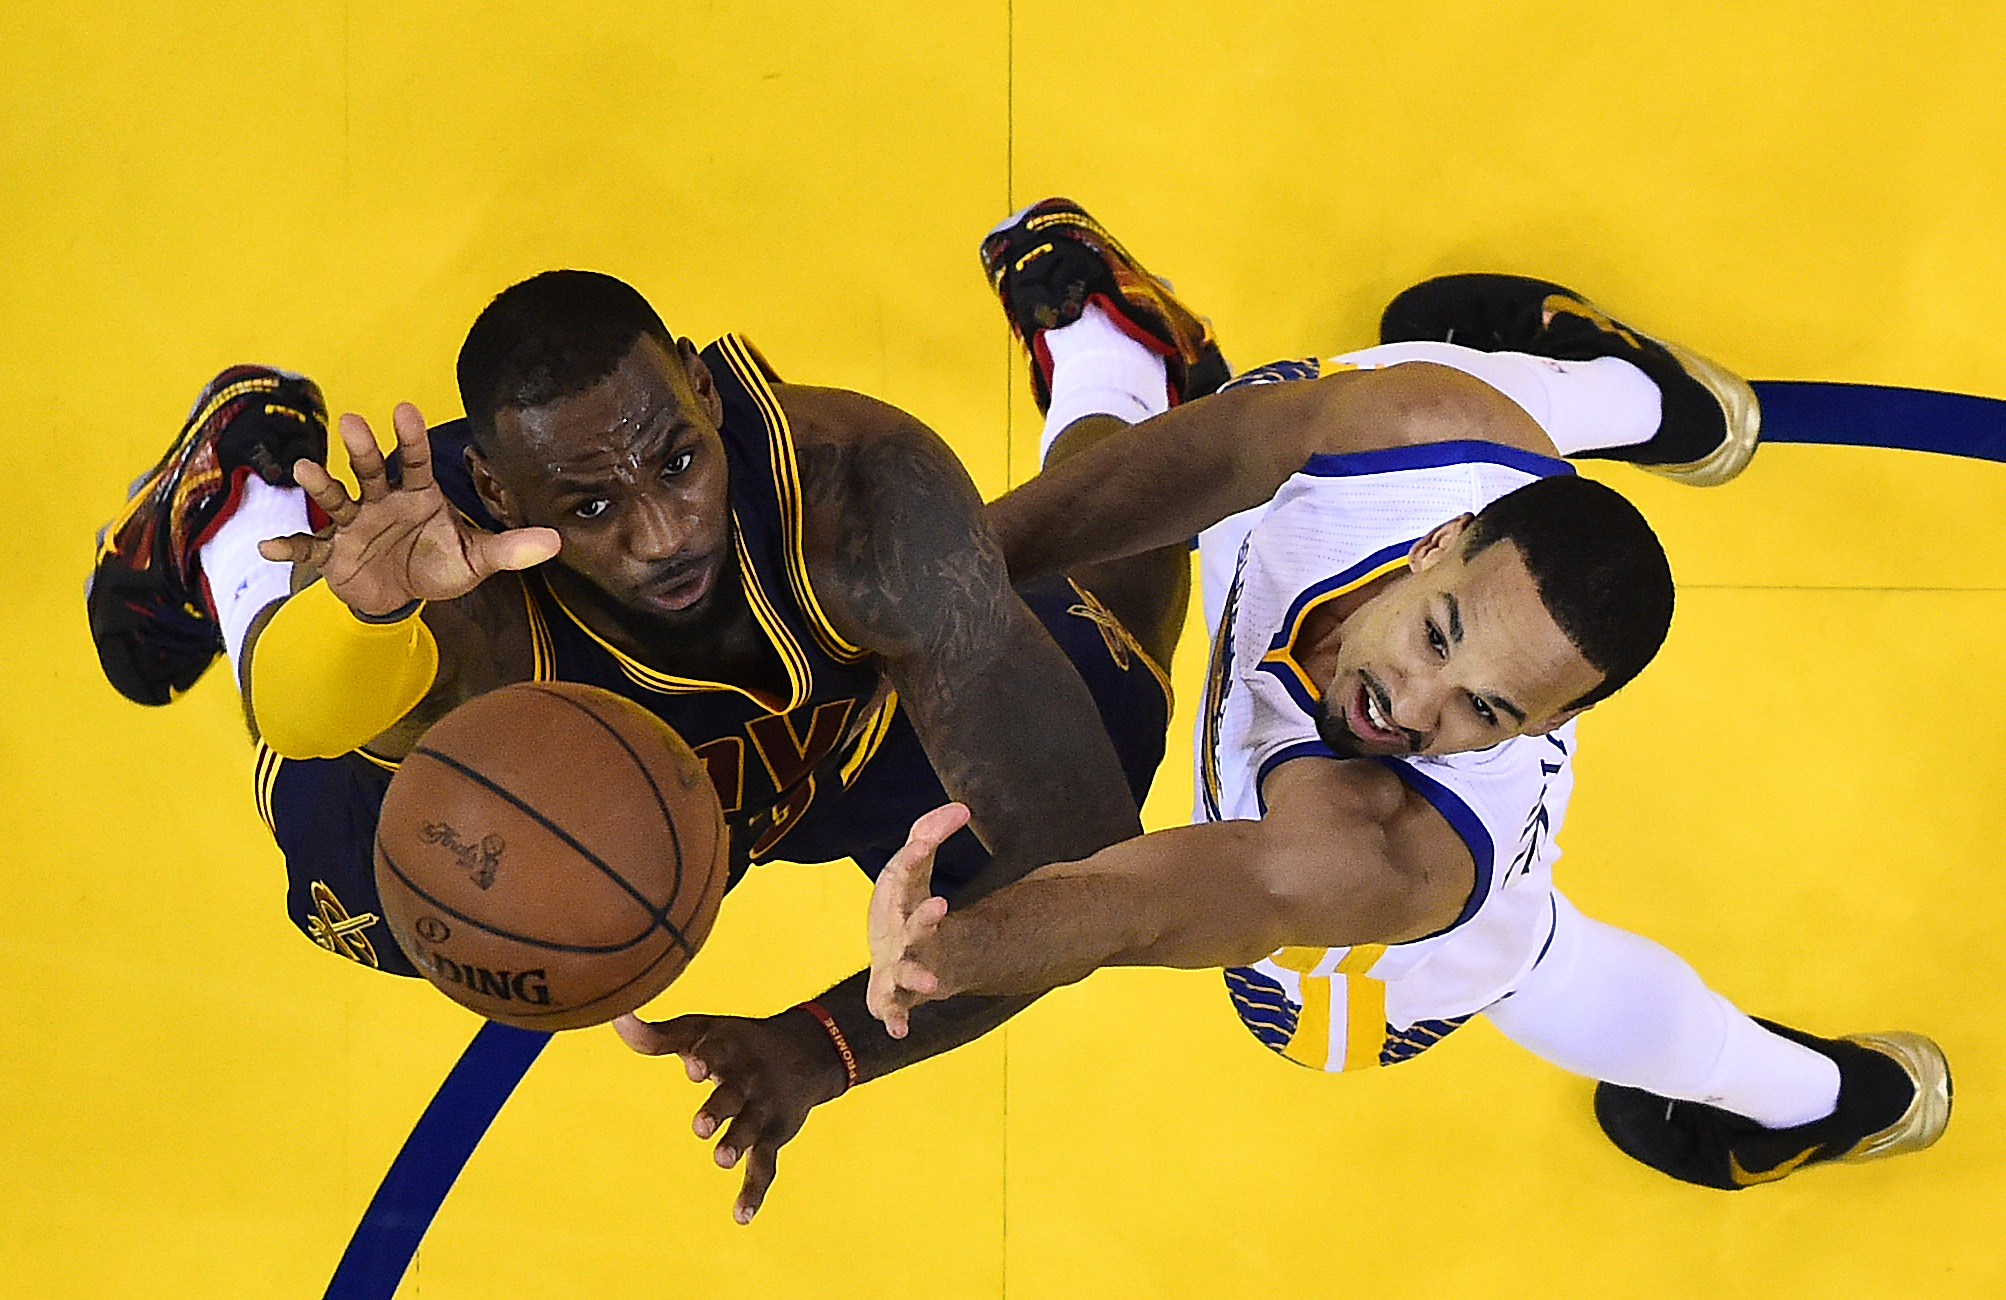 PHOTO: Cleveland Cavaliers forward LeBron James, left, reaches for the ball next to Golden State Warriors guard Shaun Livingston during the second half of Game 5 of the NBA Finals in Oakland, Calif., June 14, 2015.